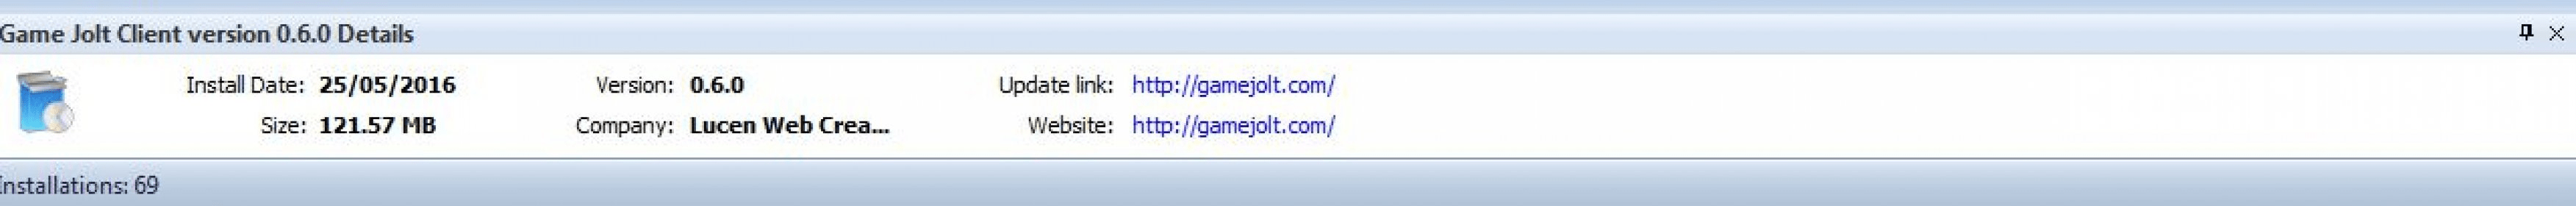 Game Jolt Client - Download, play and review indie games with this free ...